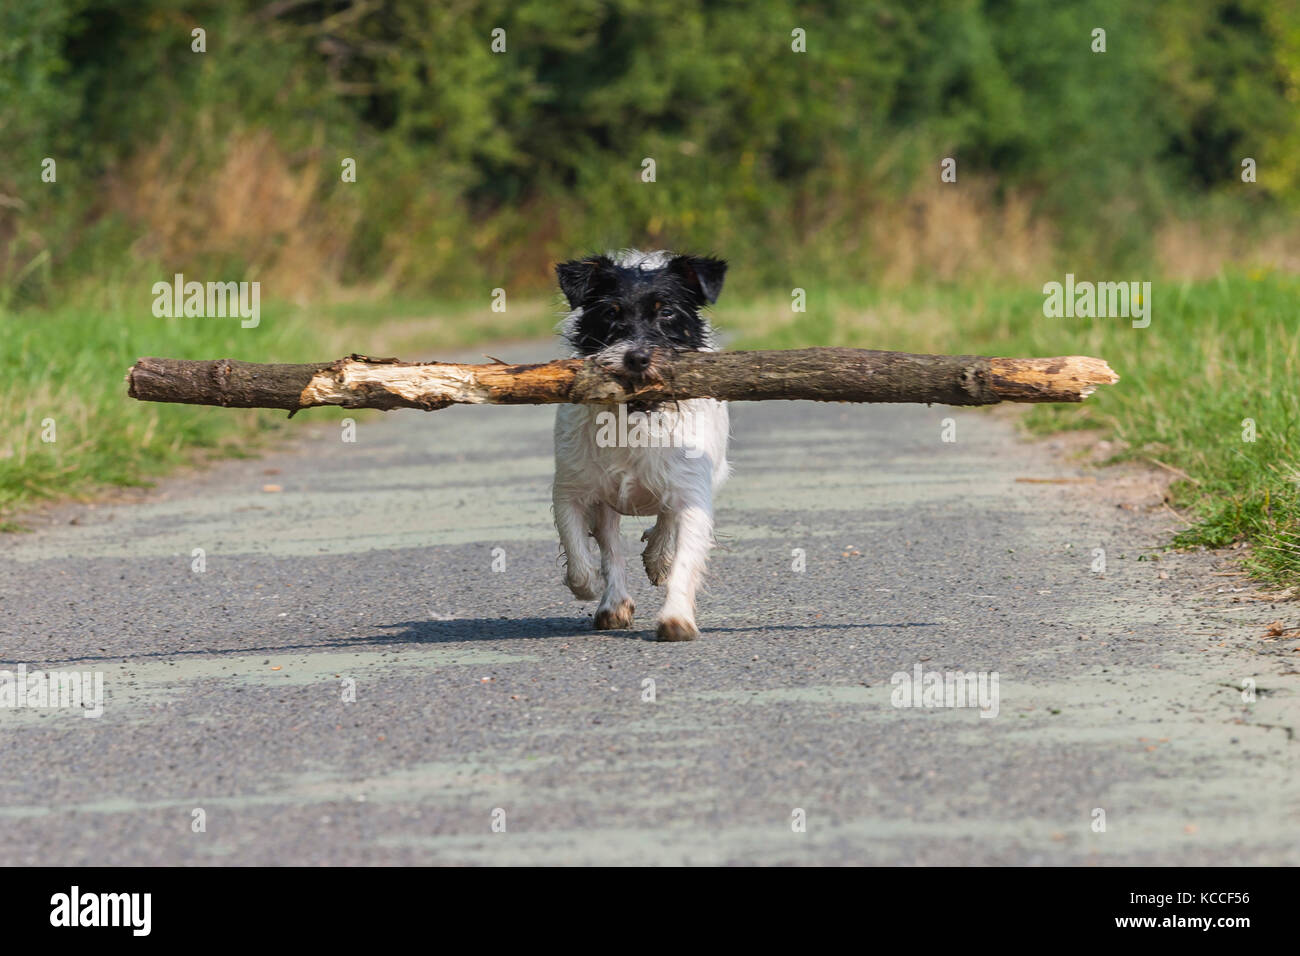 Small terrier dog carrying a big stick Stock Photo